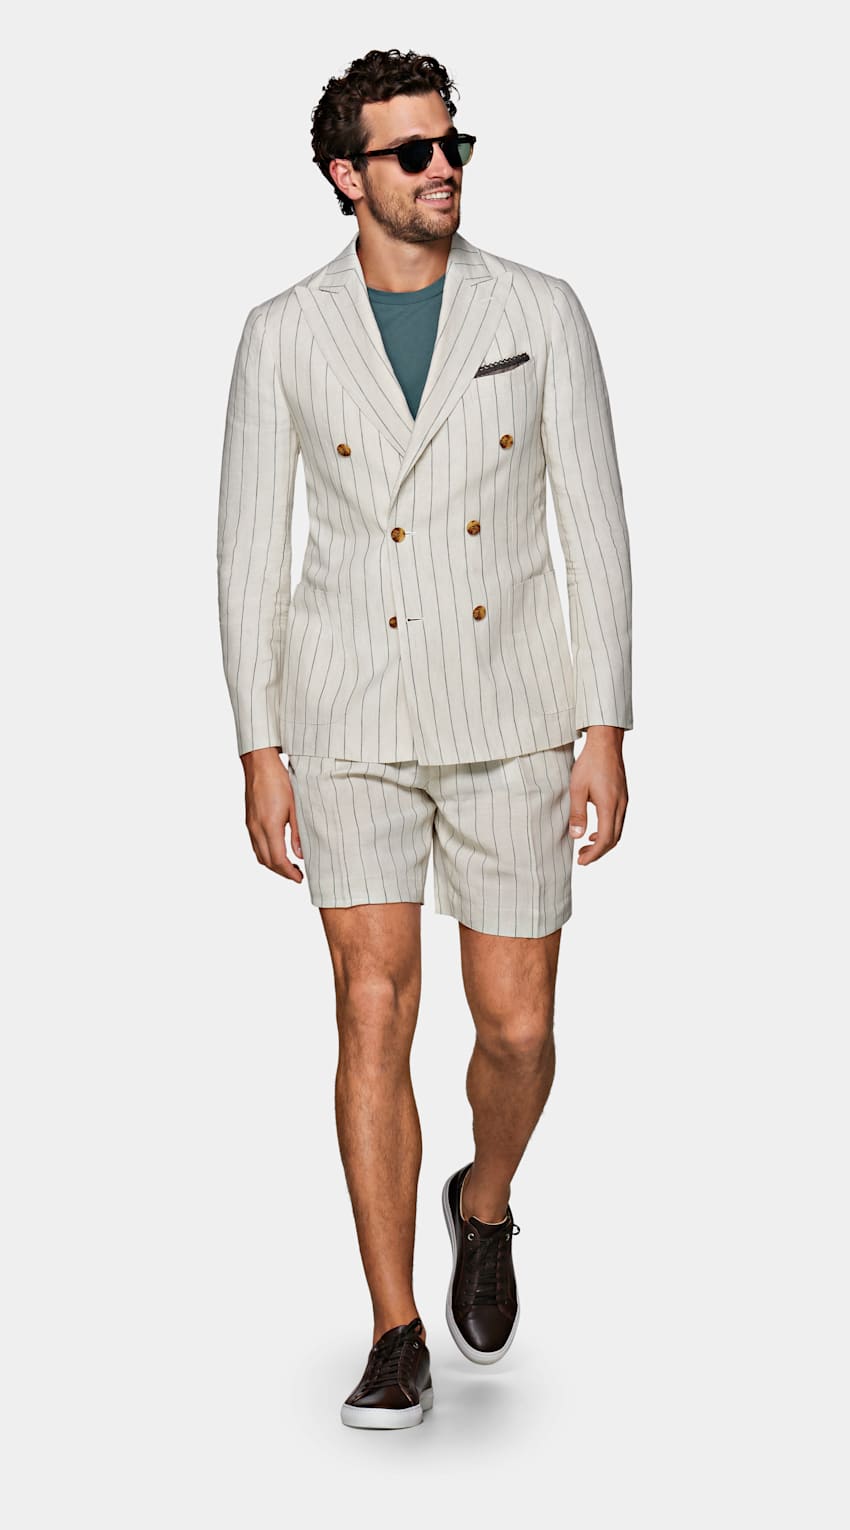 SUITSUPPLY  by Solbiati, Italy Off White Stripe Havana Suit